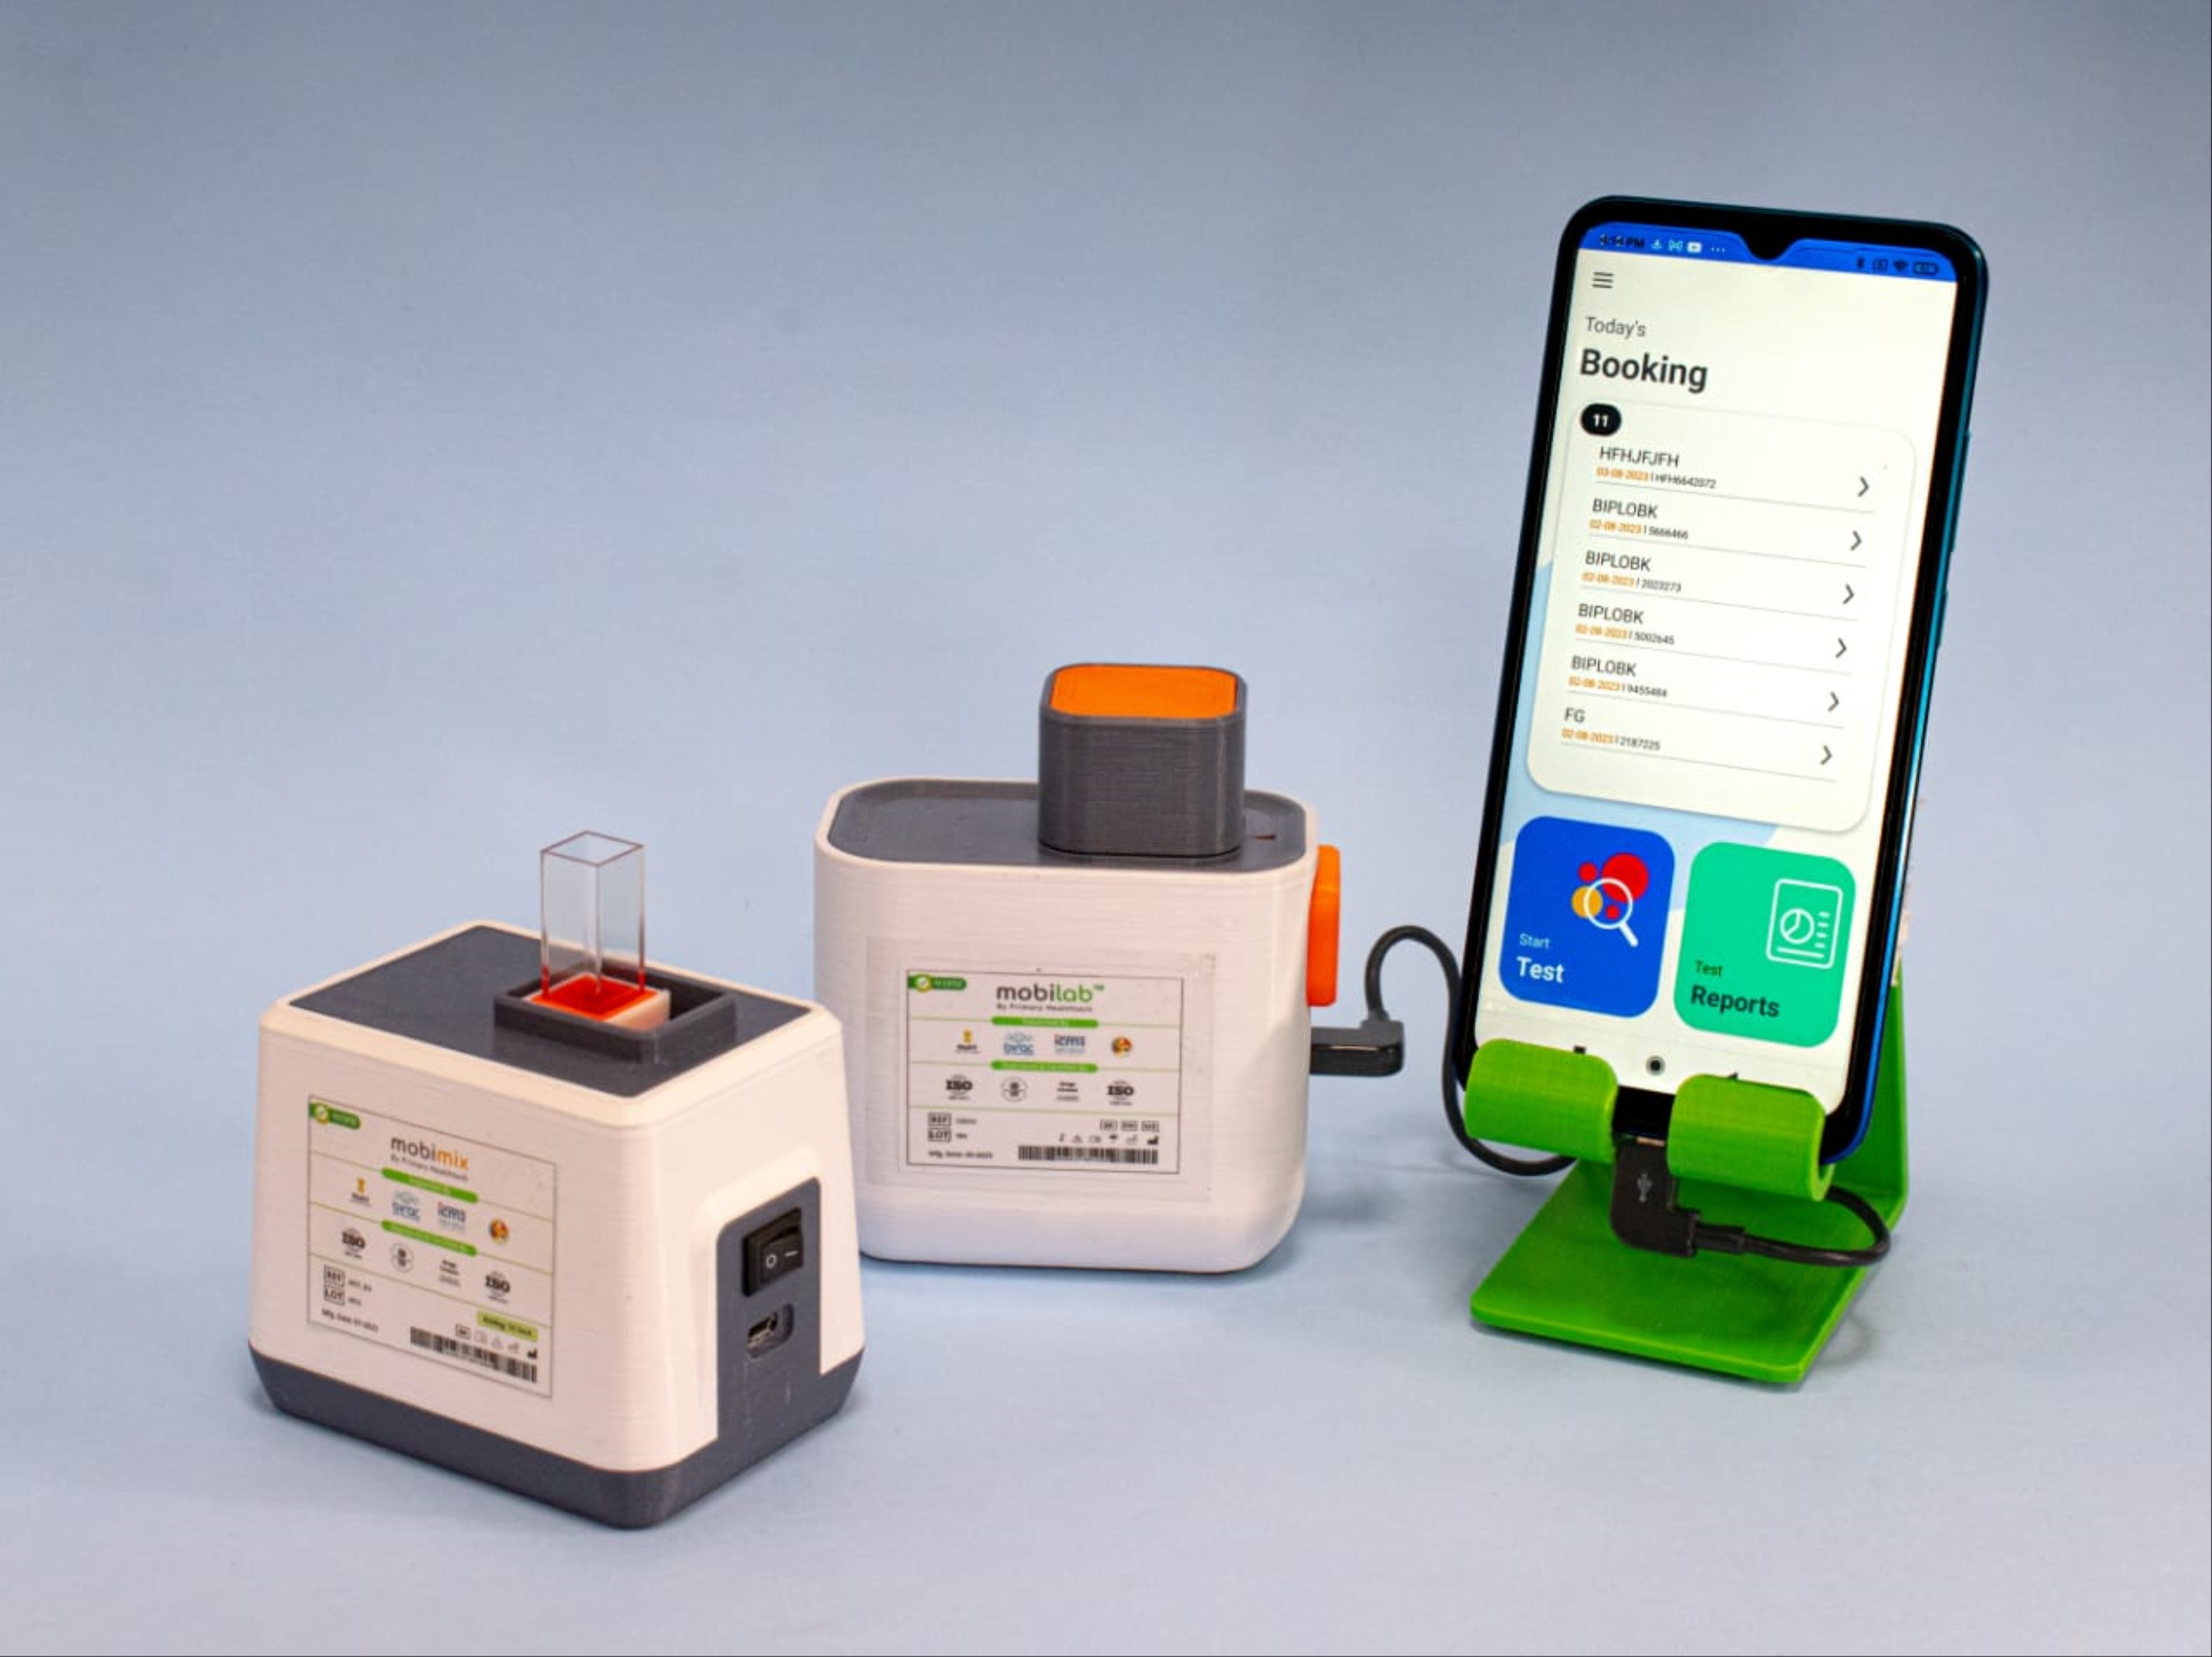 IIT Guwahati Alumni-led Startup M/s Primary Healthtech Pvt. Ltd. develops MobilabTM, a portable device for Diagnosis of Chronic Non-Communicable Diseases